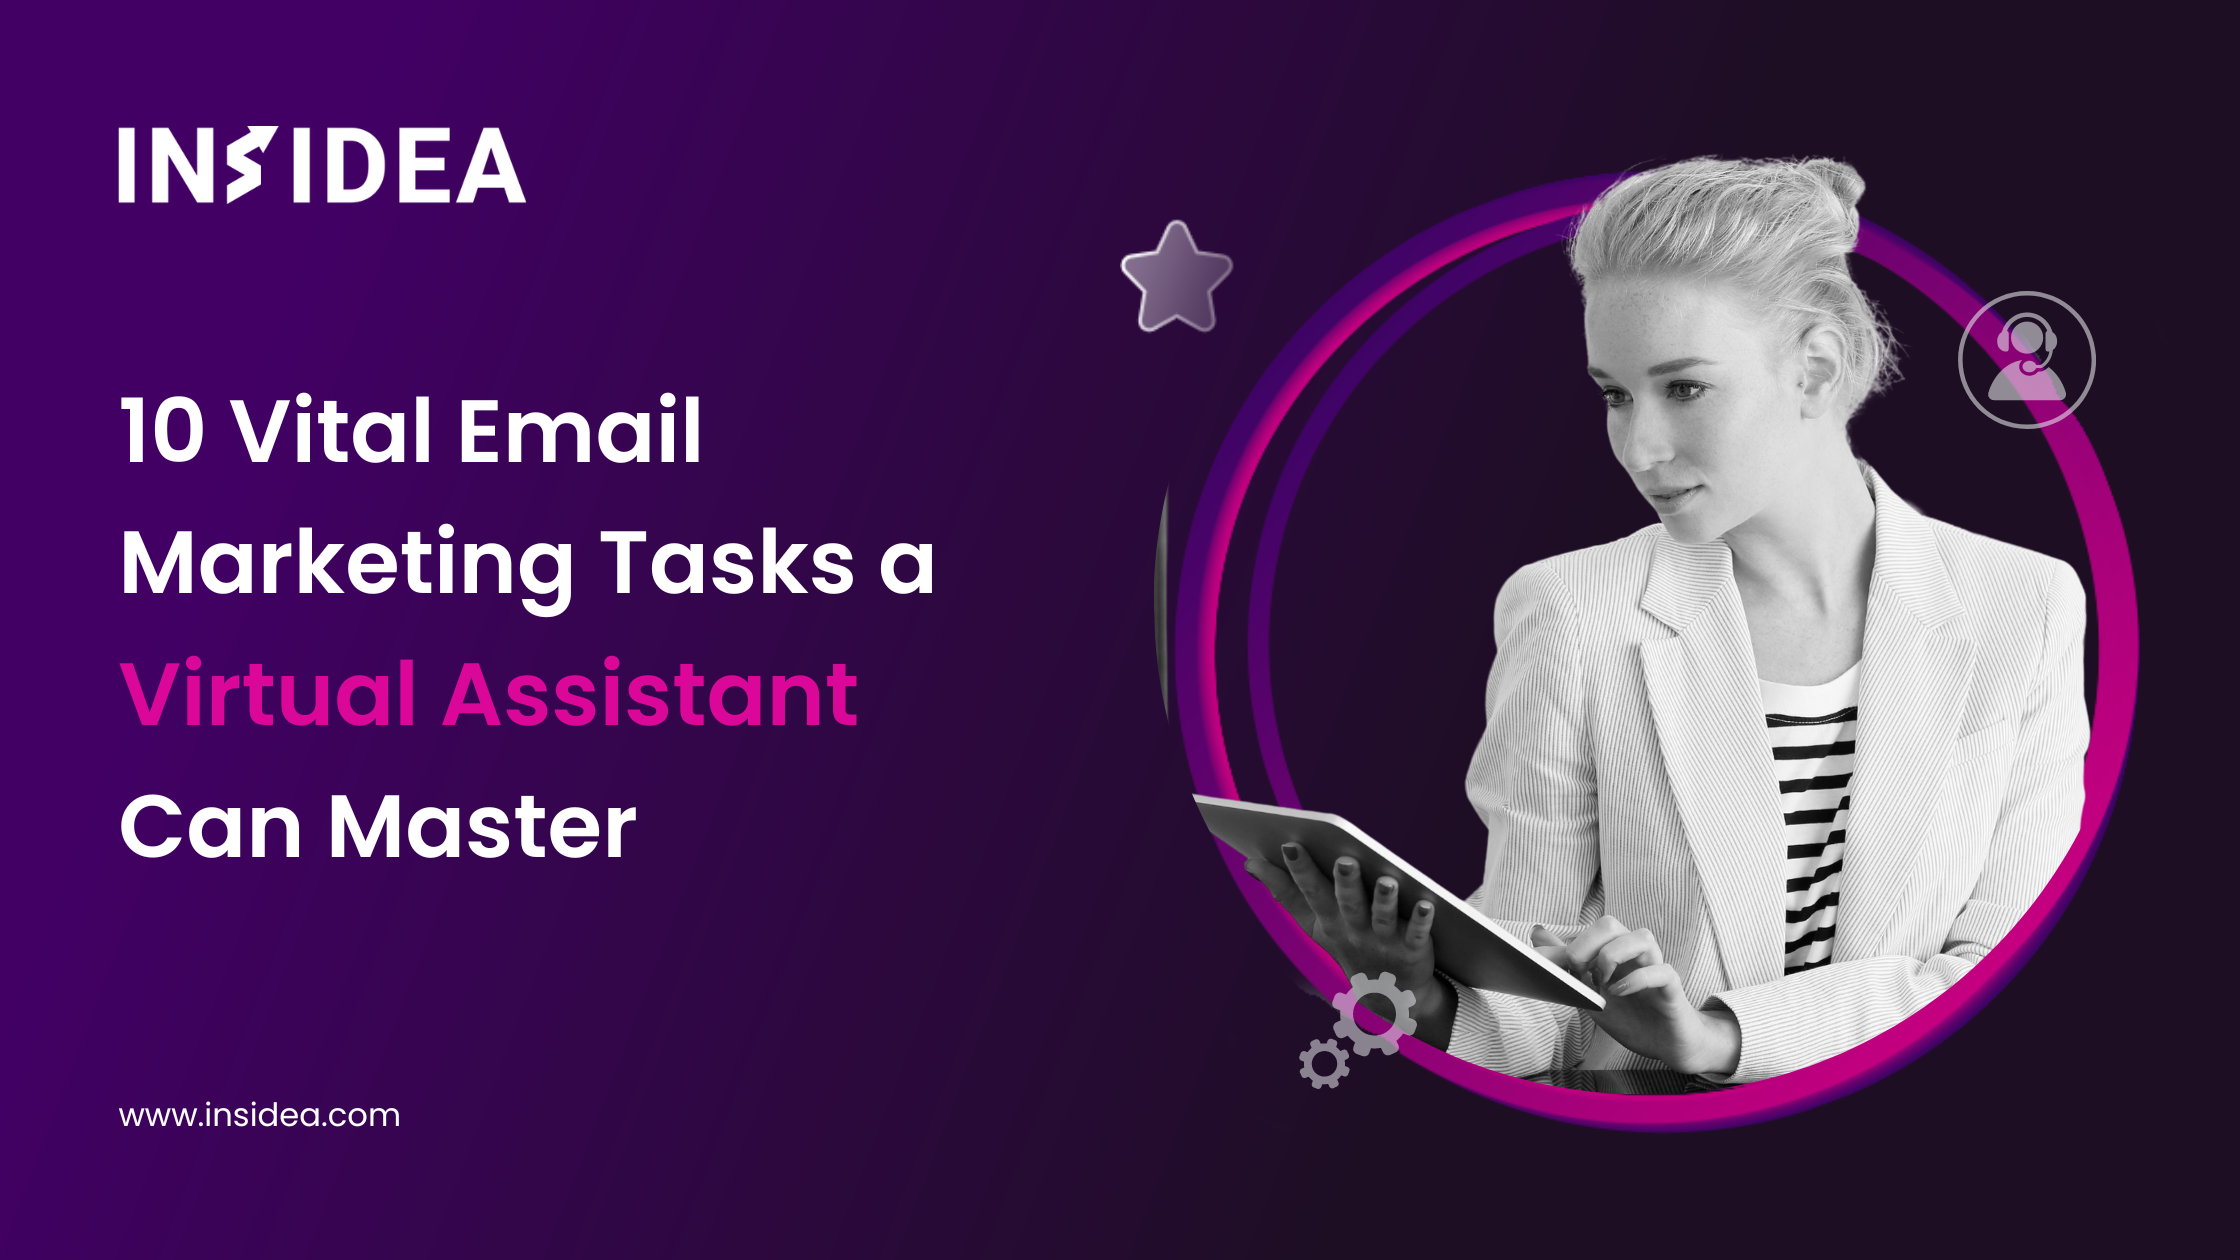 10 Vital Email Marketing Tasks a Virtual Assistant Can Master